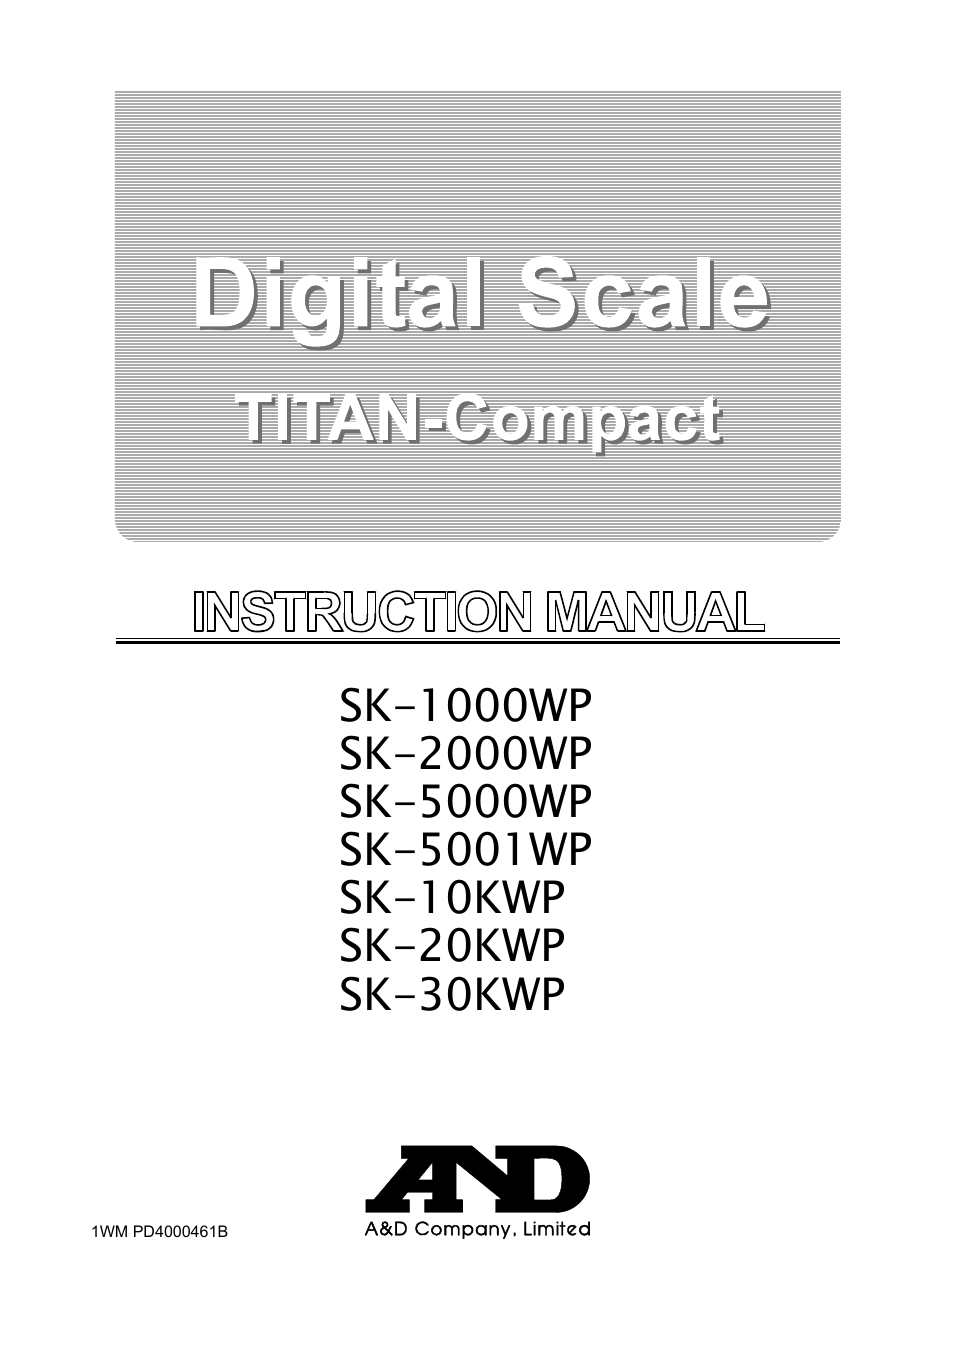 Digital Scale SK-10KWP (Page 1)